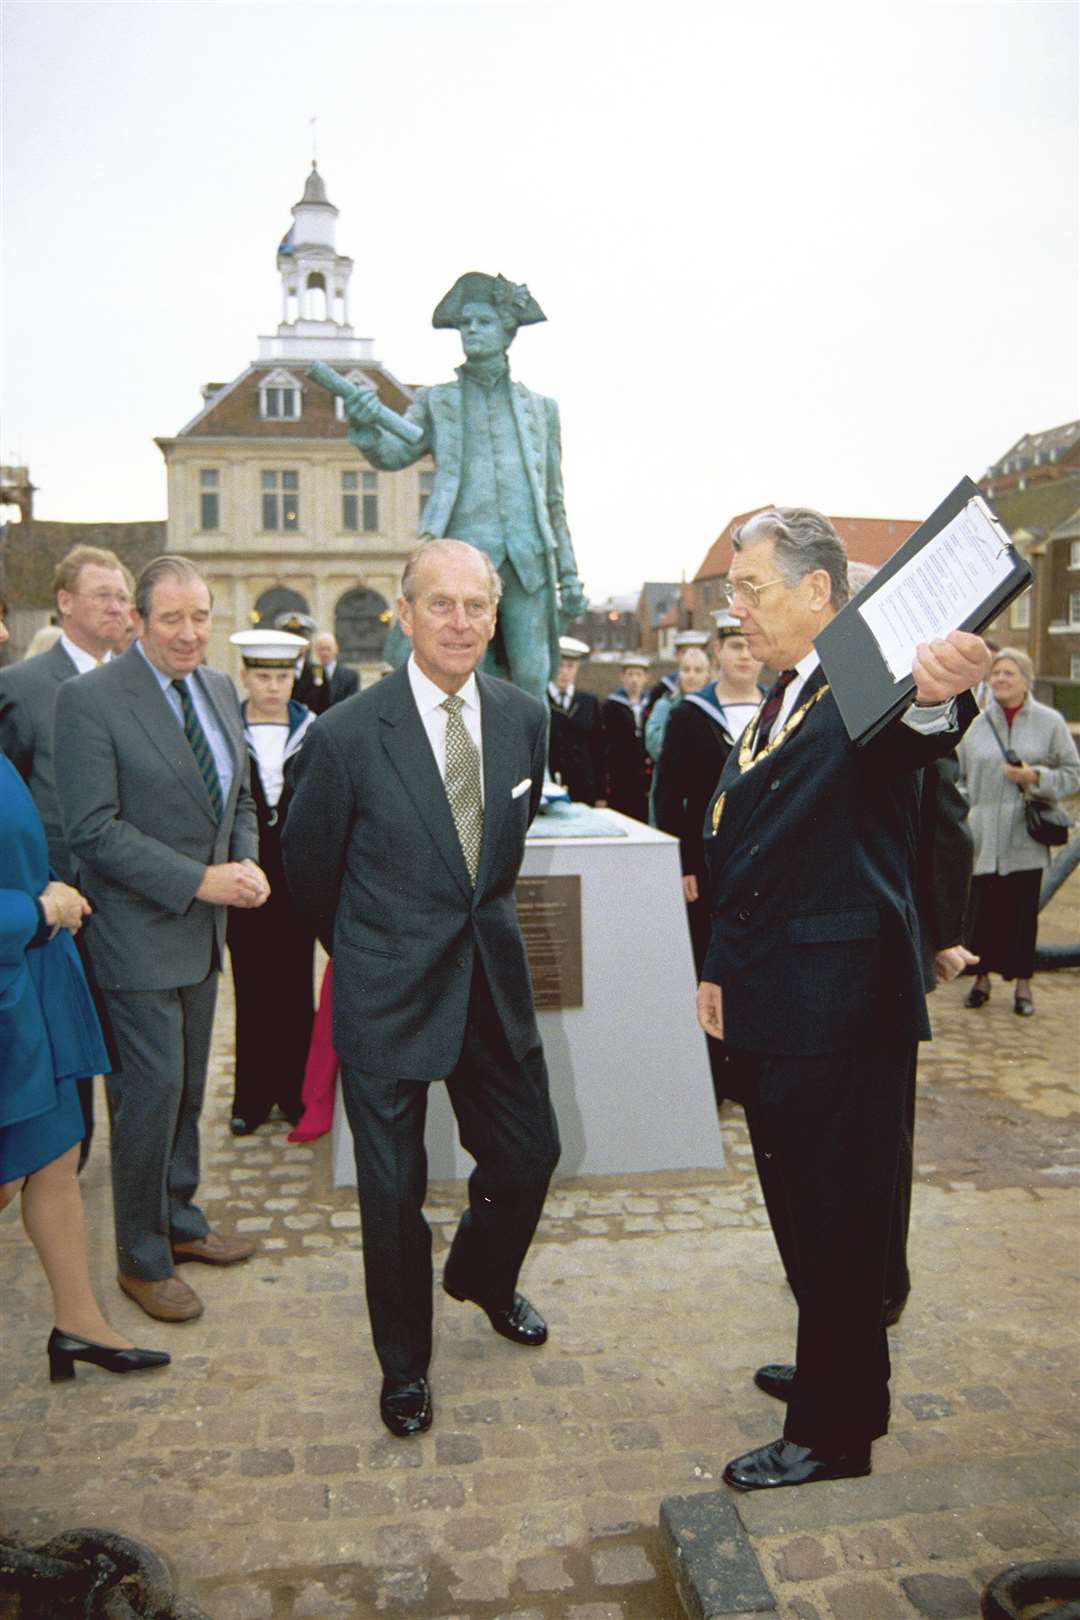 With the Duke of Edinburgh at the unveiling of the George Vancouver statue in Purfleet, Lynn